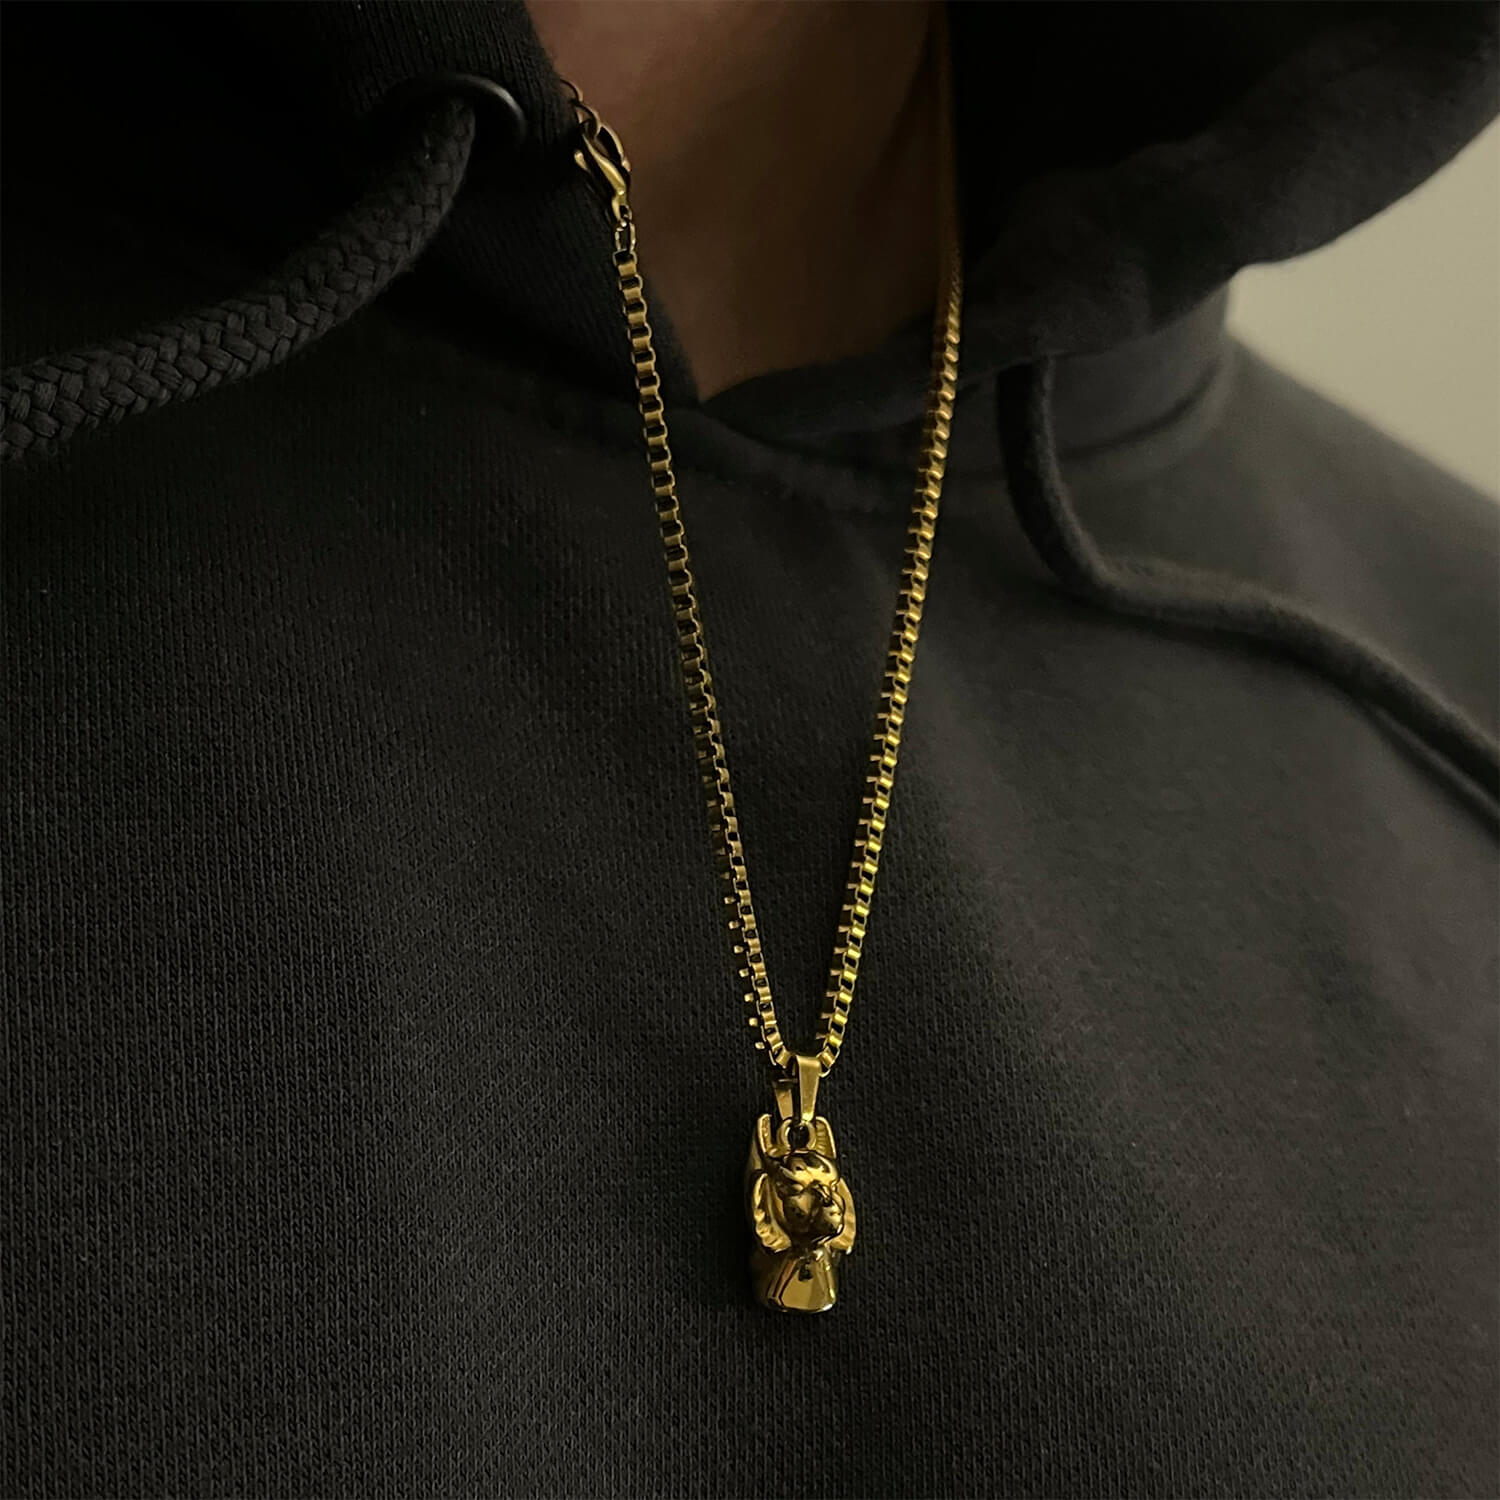 male wearing gold anubis pendant outside of hoodie